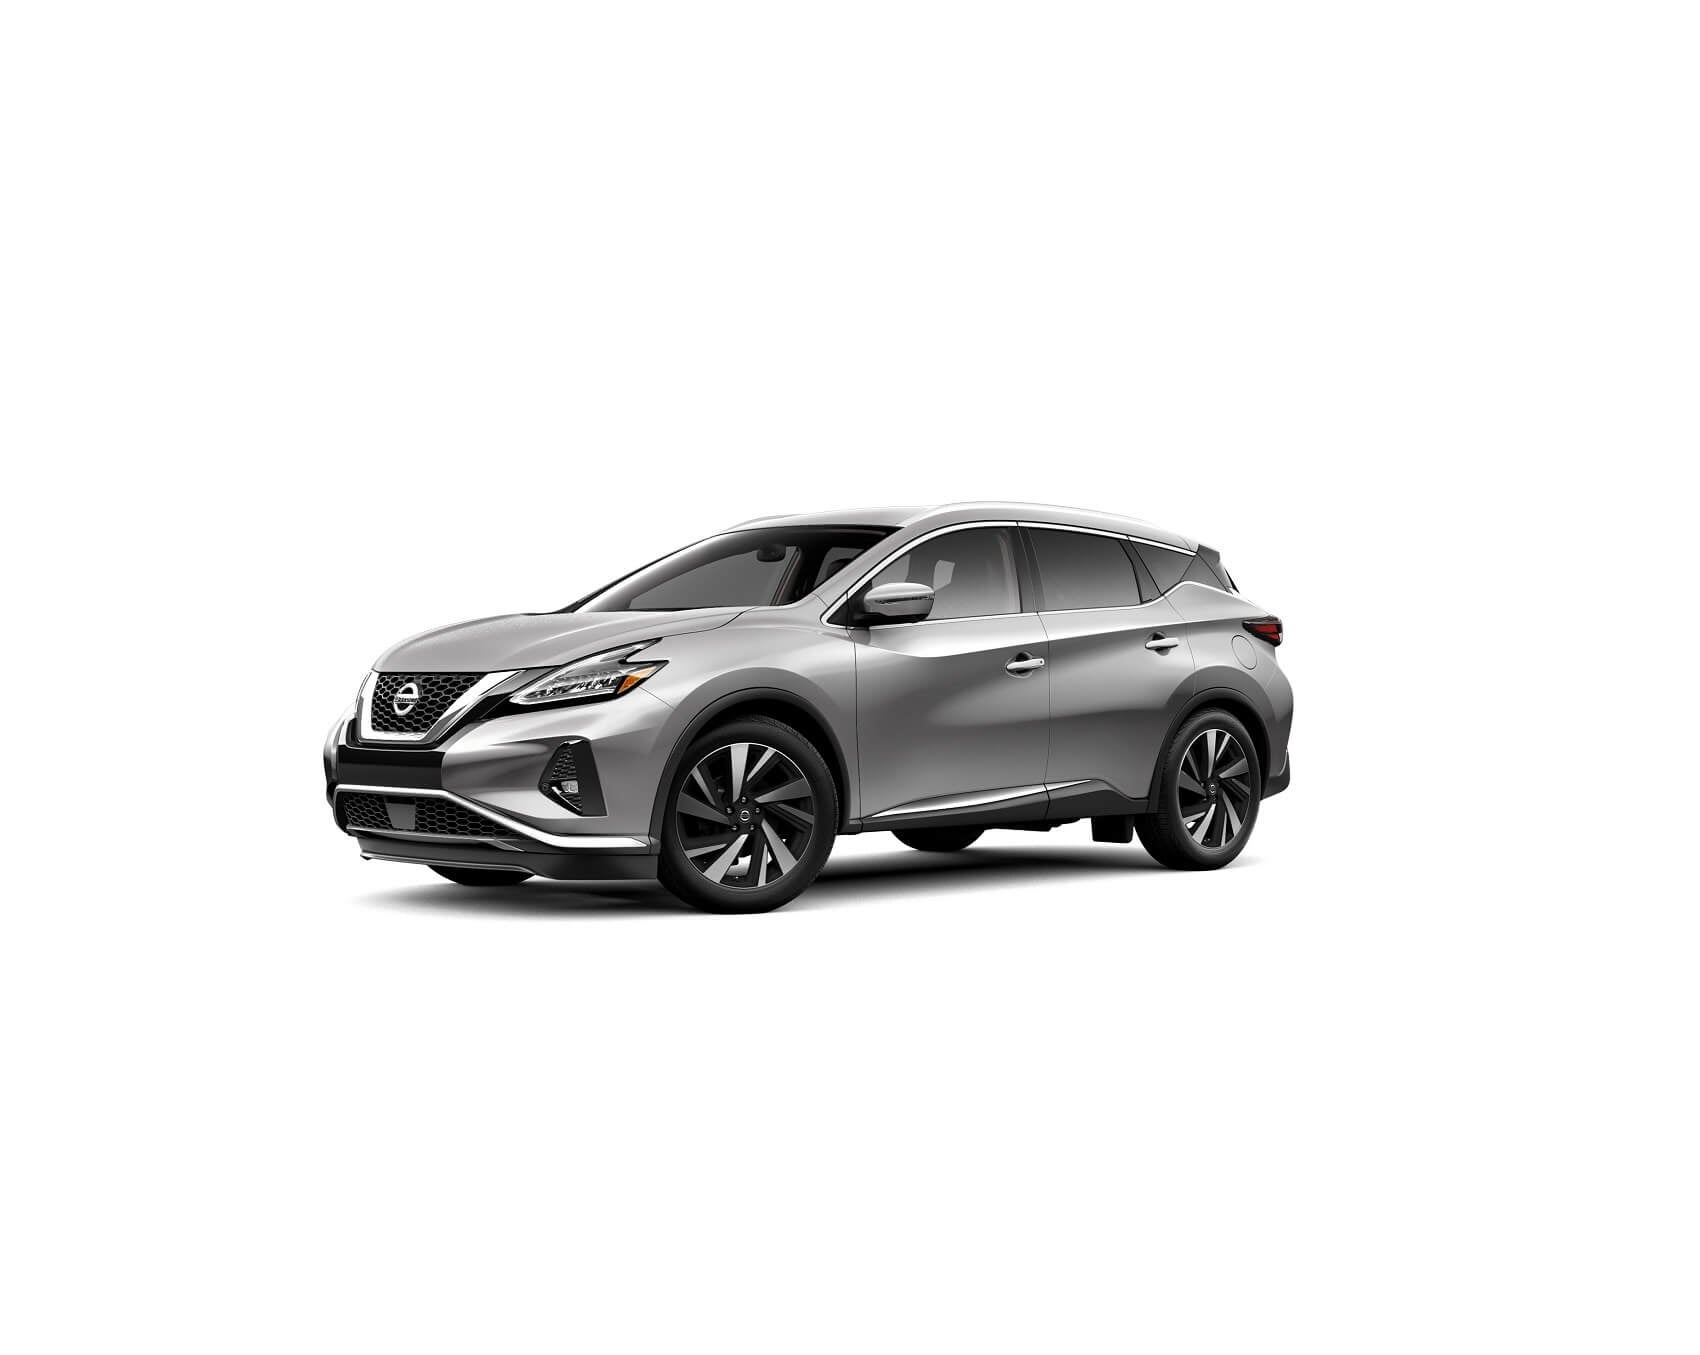 NISSAN MURANO SAFETY RATINGS